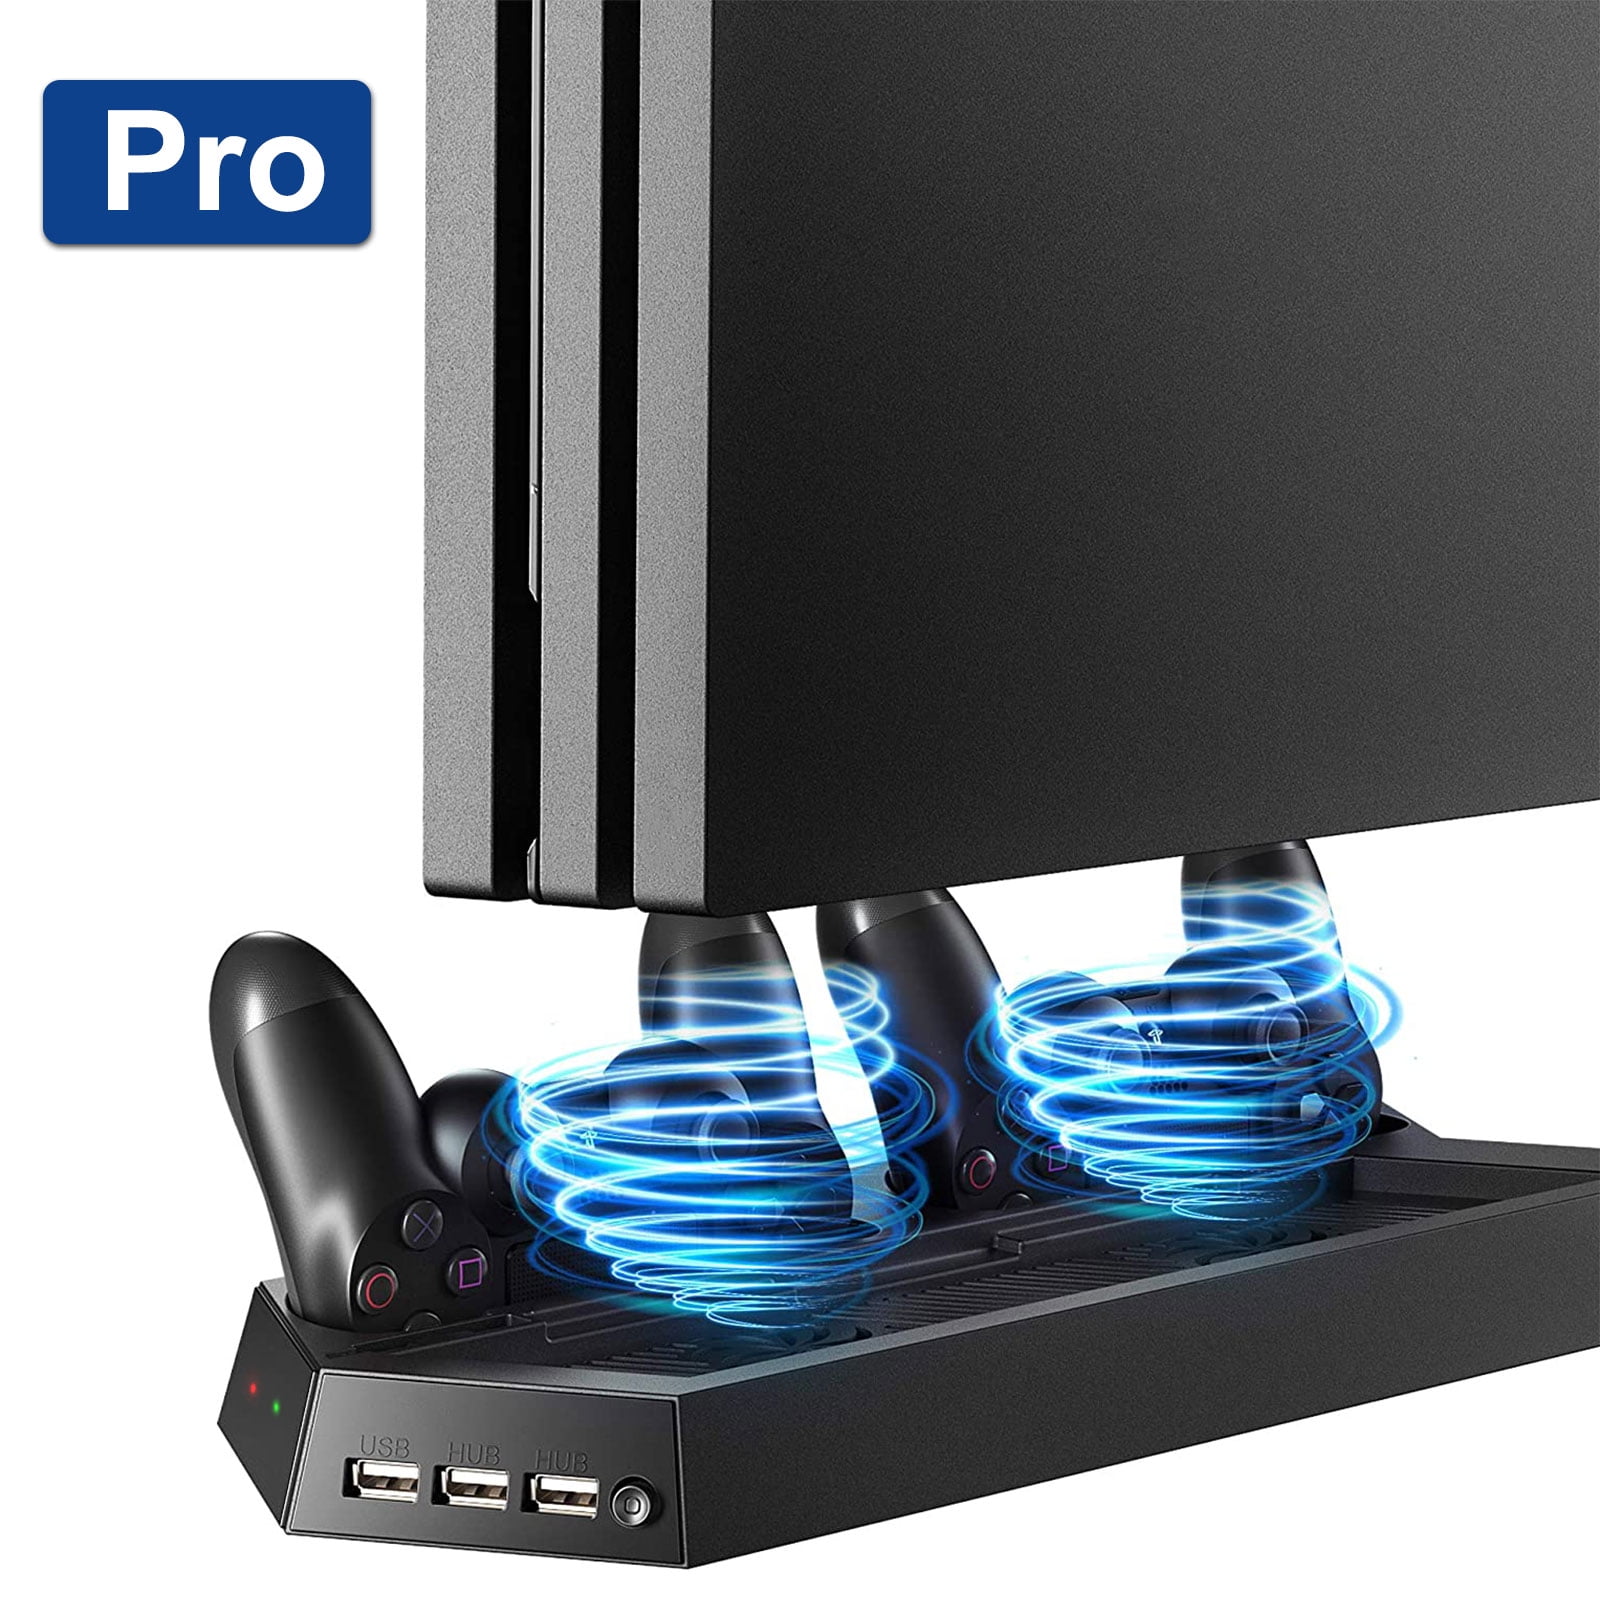 Vertical Stand for PS4 Pro with Fan, Charging Station for Sony Playstation 4 Pro Game Console, Charger for Dualshock 4 ( Not Regular PS4/Slim ) - Walmart.com